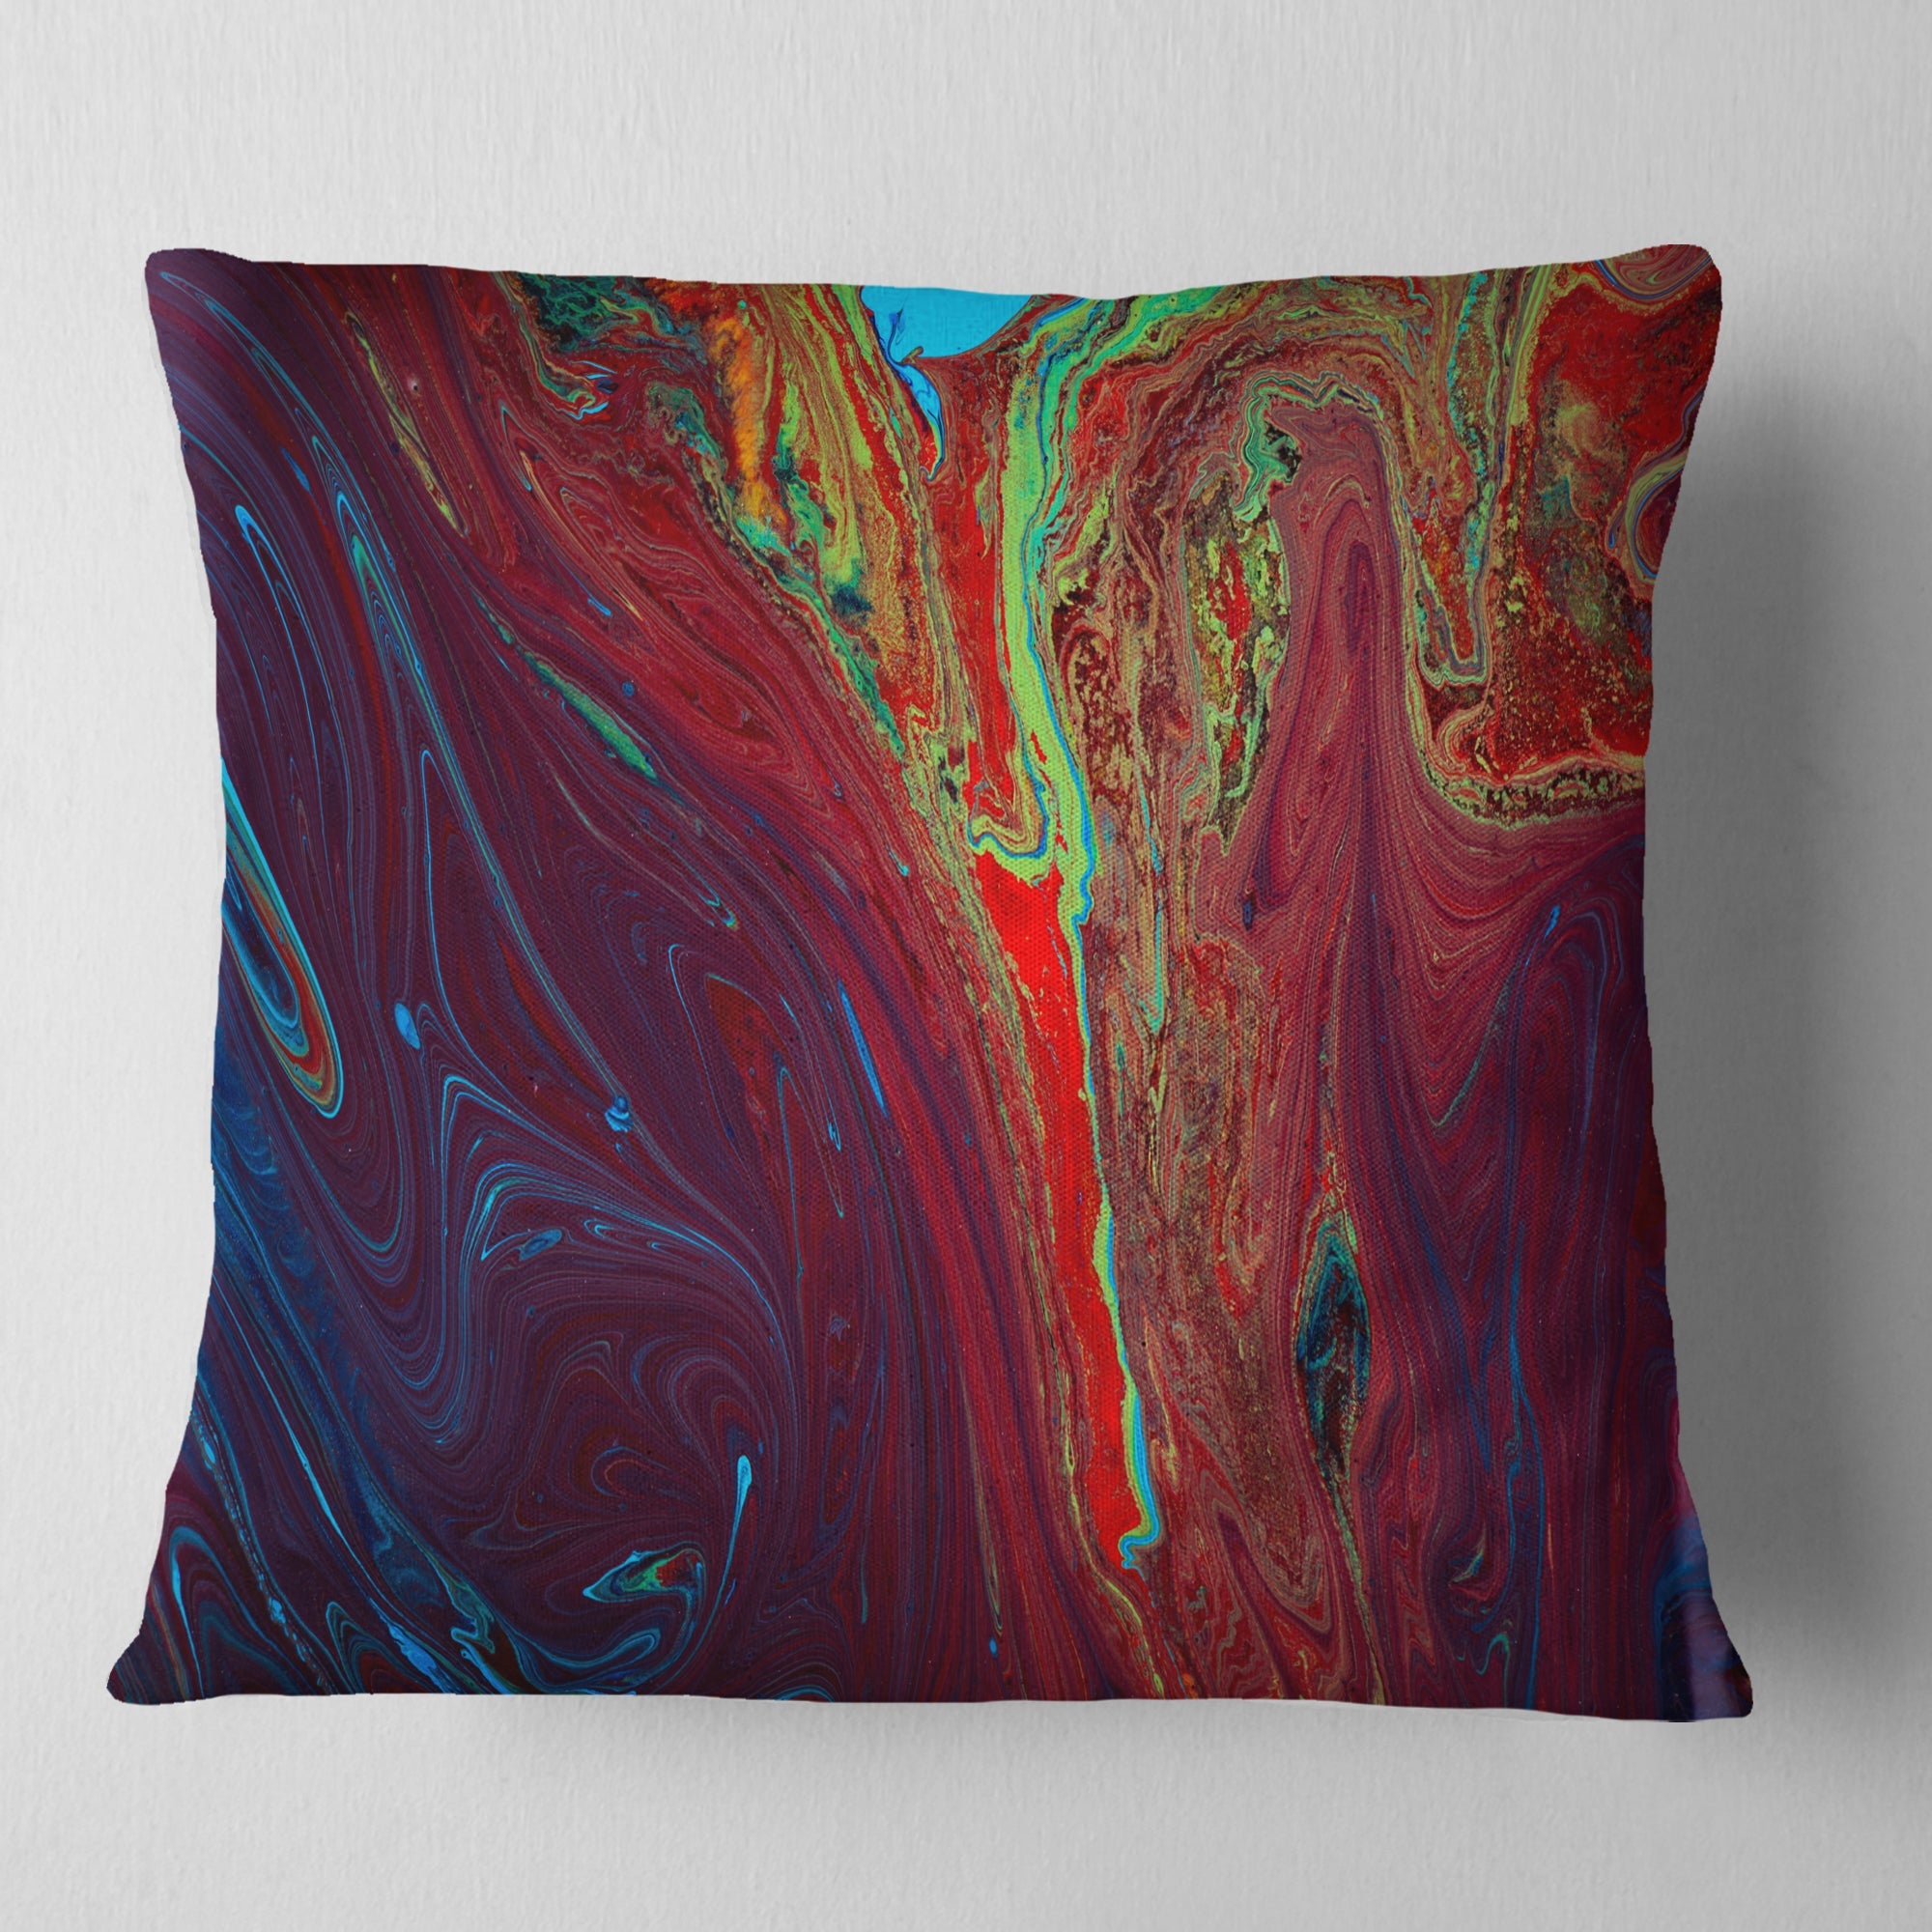 Dark Red Abstract Acrylic Paint Mix - Abstract Throw Pillow